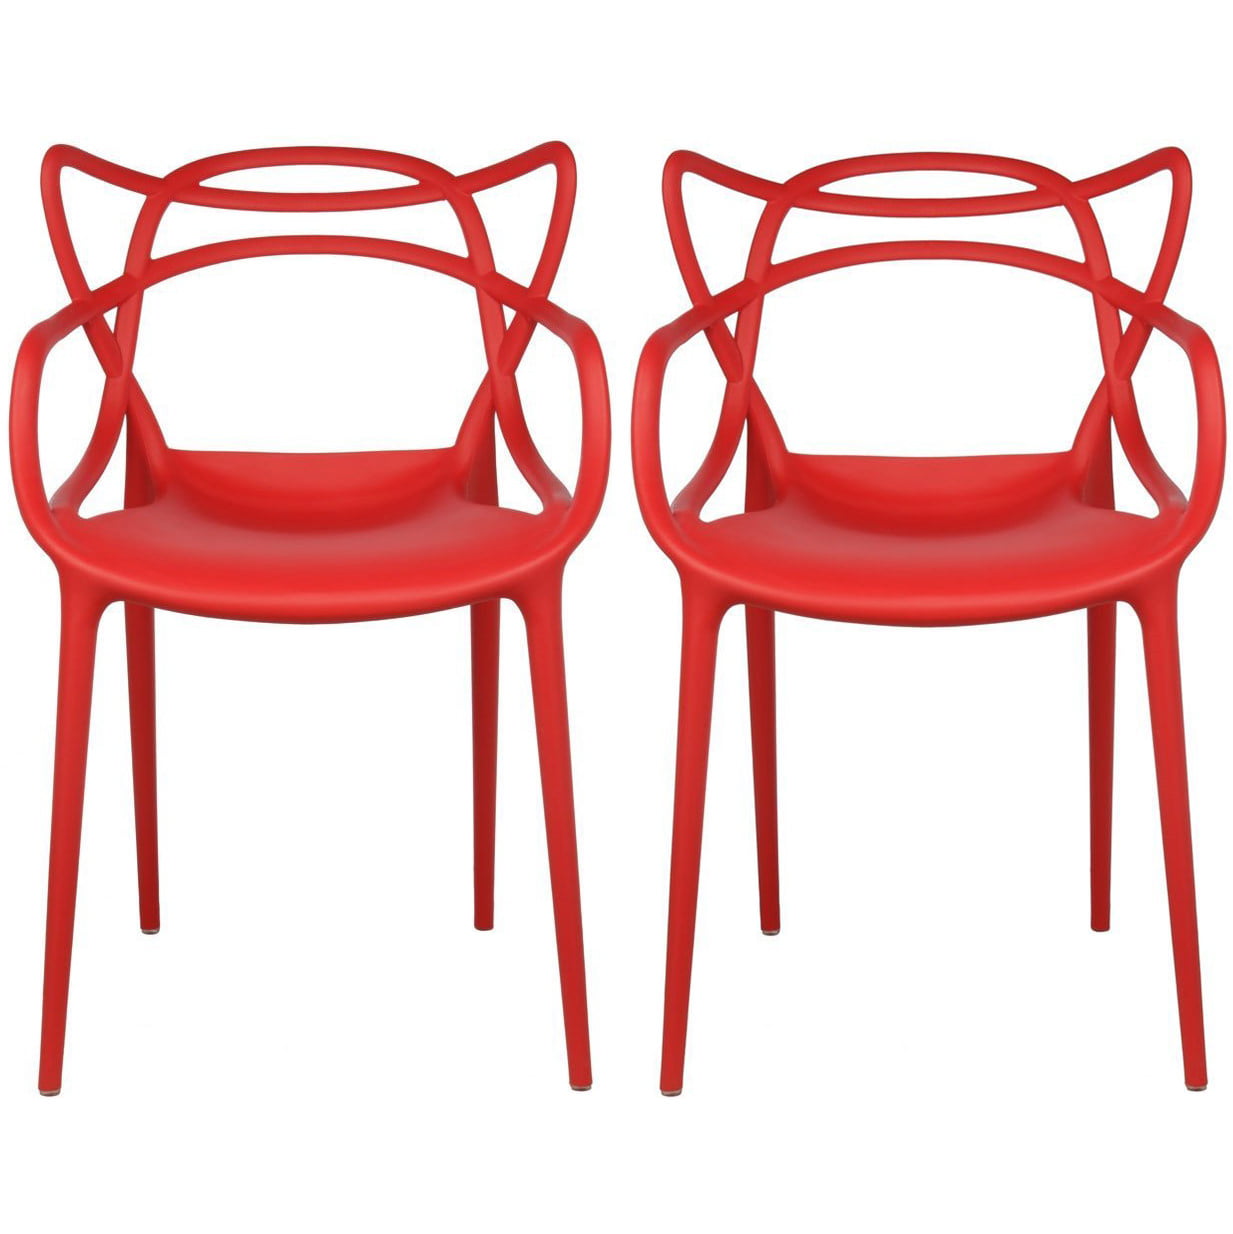 Modern plastic dining chairs